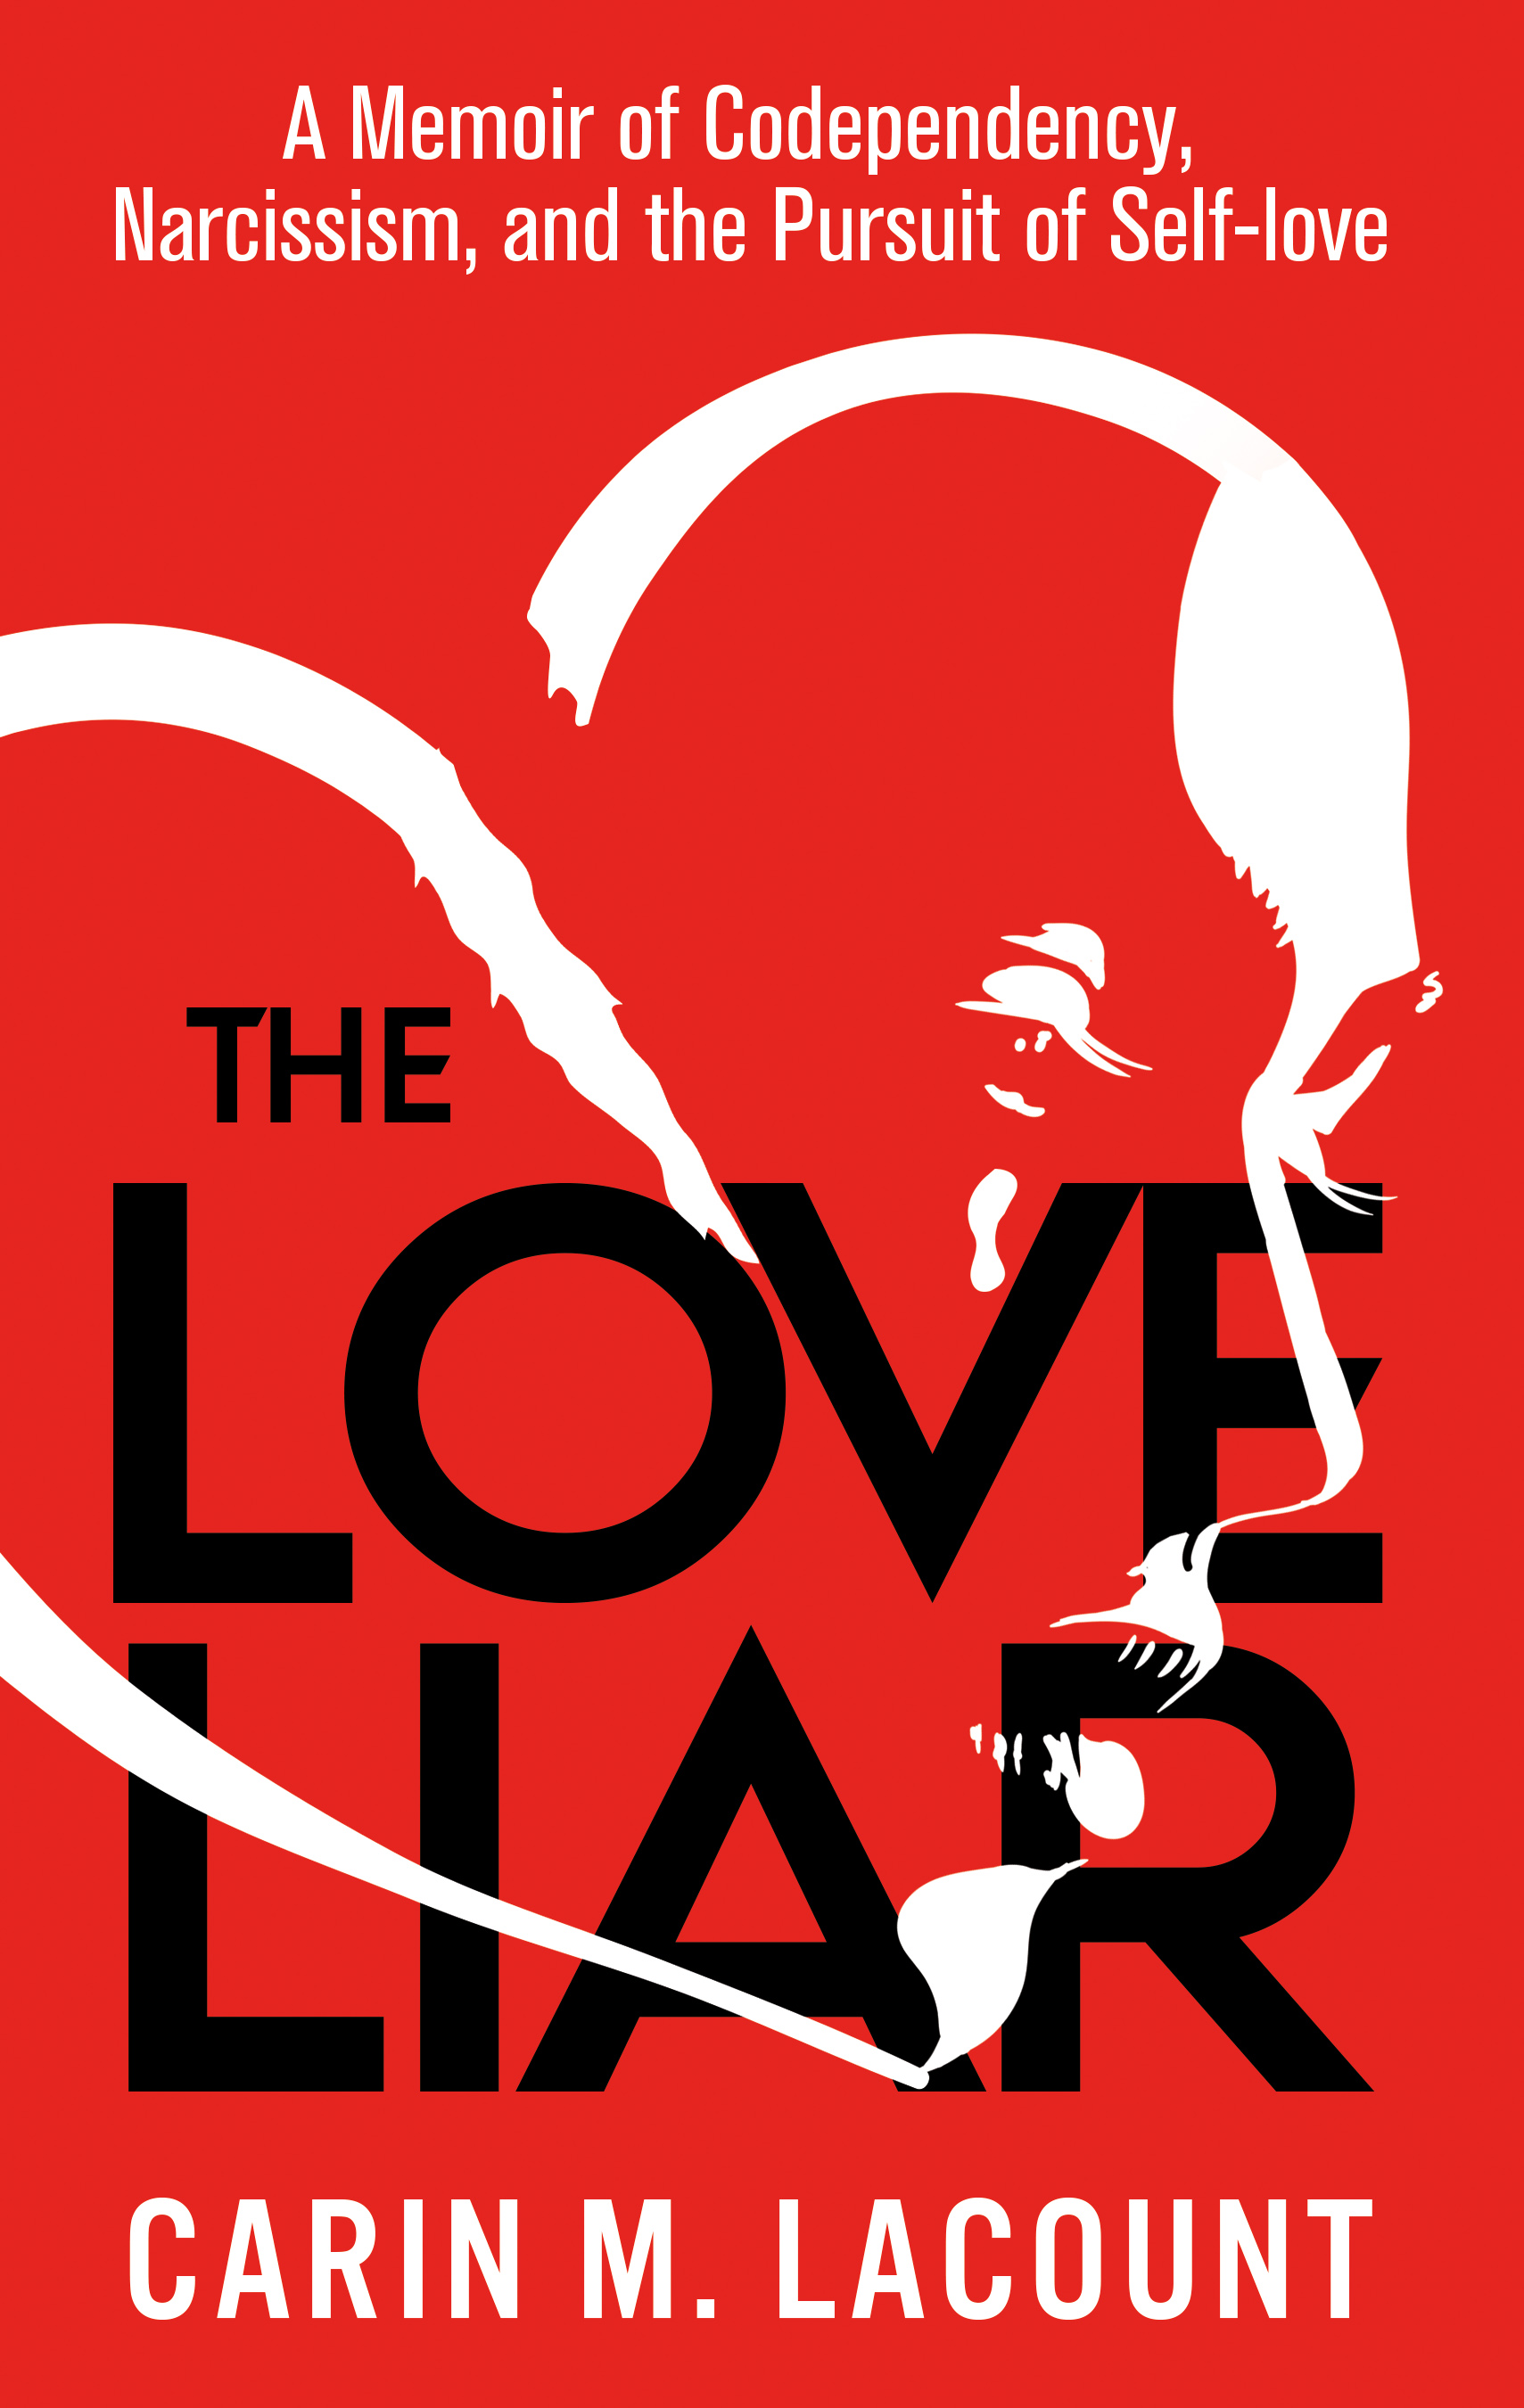 The cover art of the book "The Love Liar"